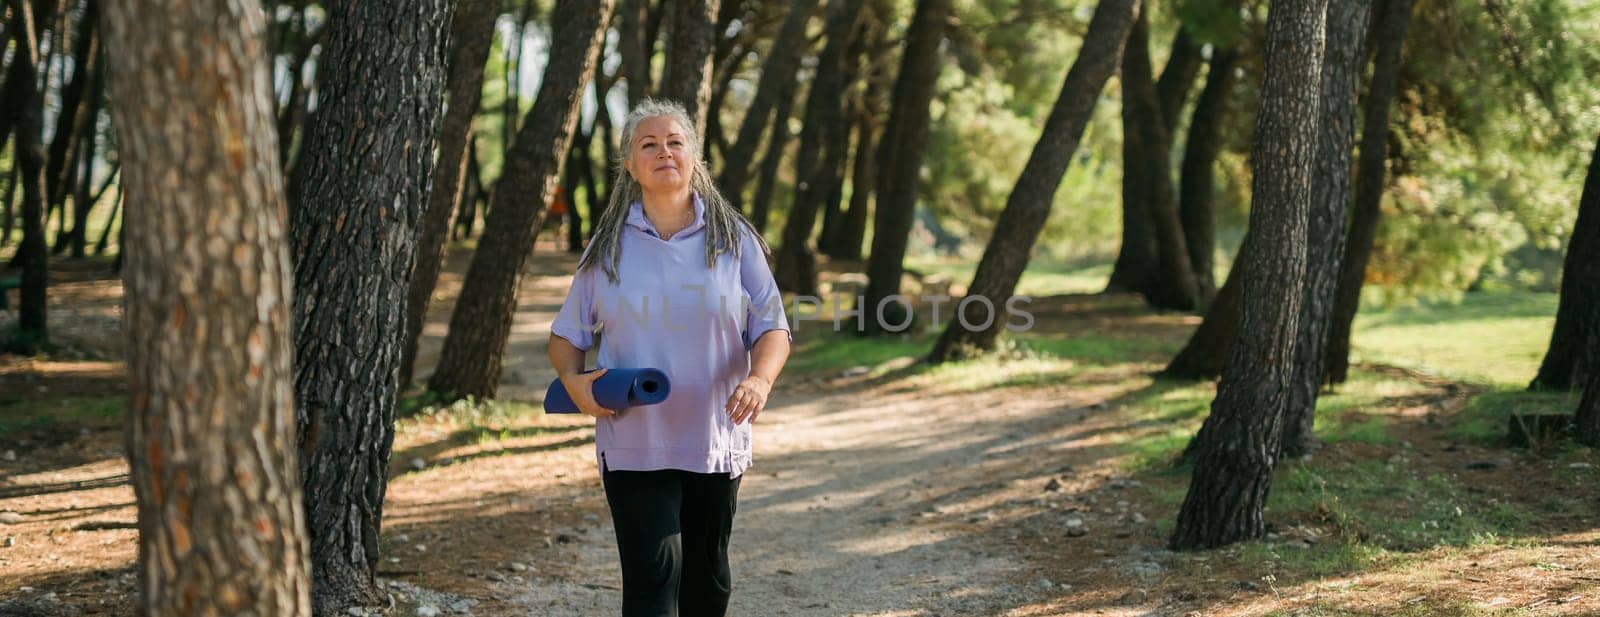 Banner mature elderly woman with grey hair dreadlocks going to workout in park and standing with mat for exercises in green park copy space by Satura86